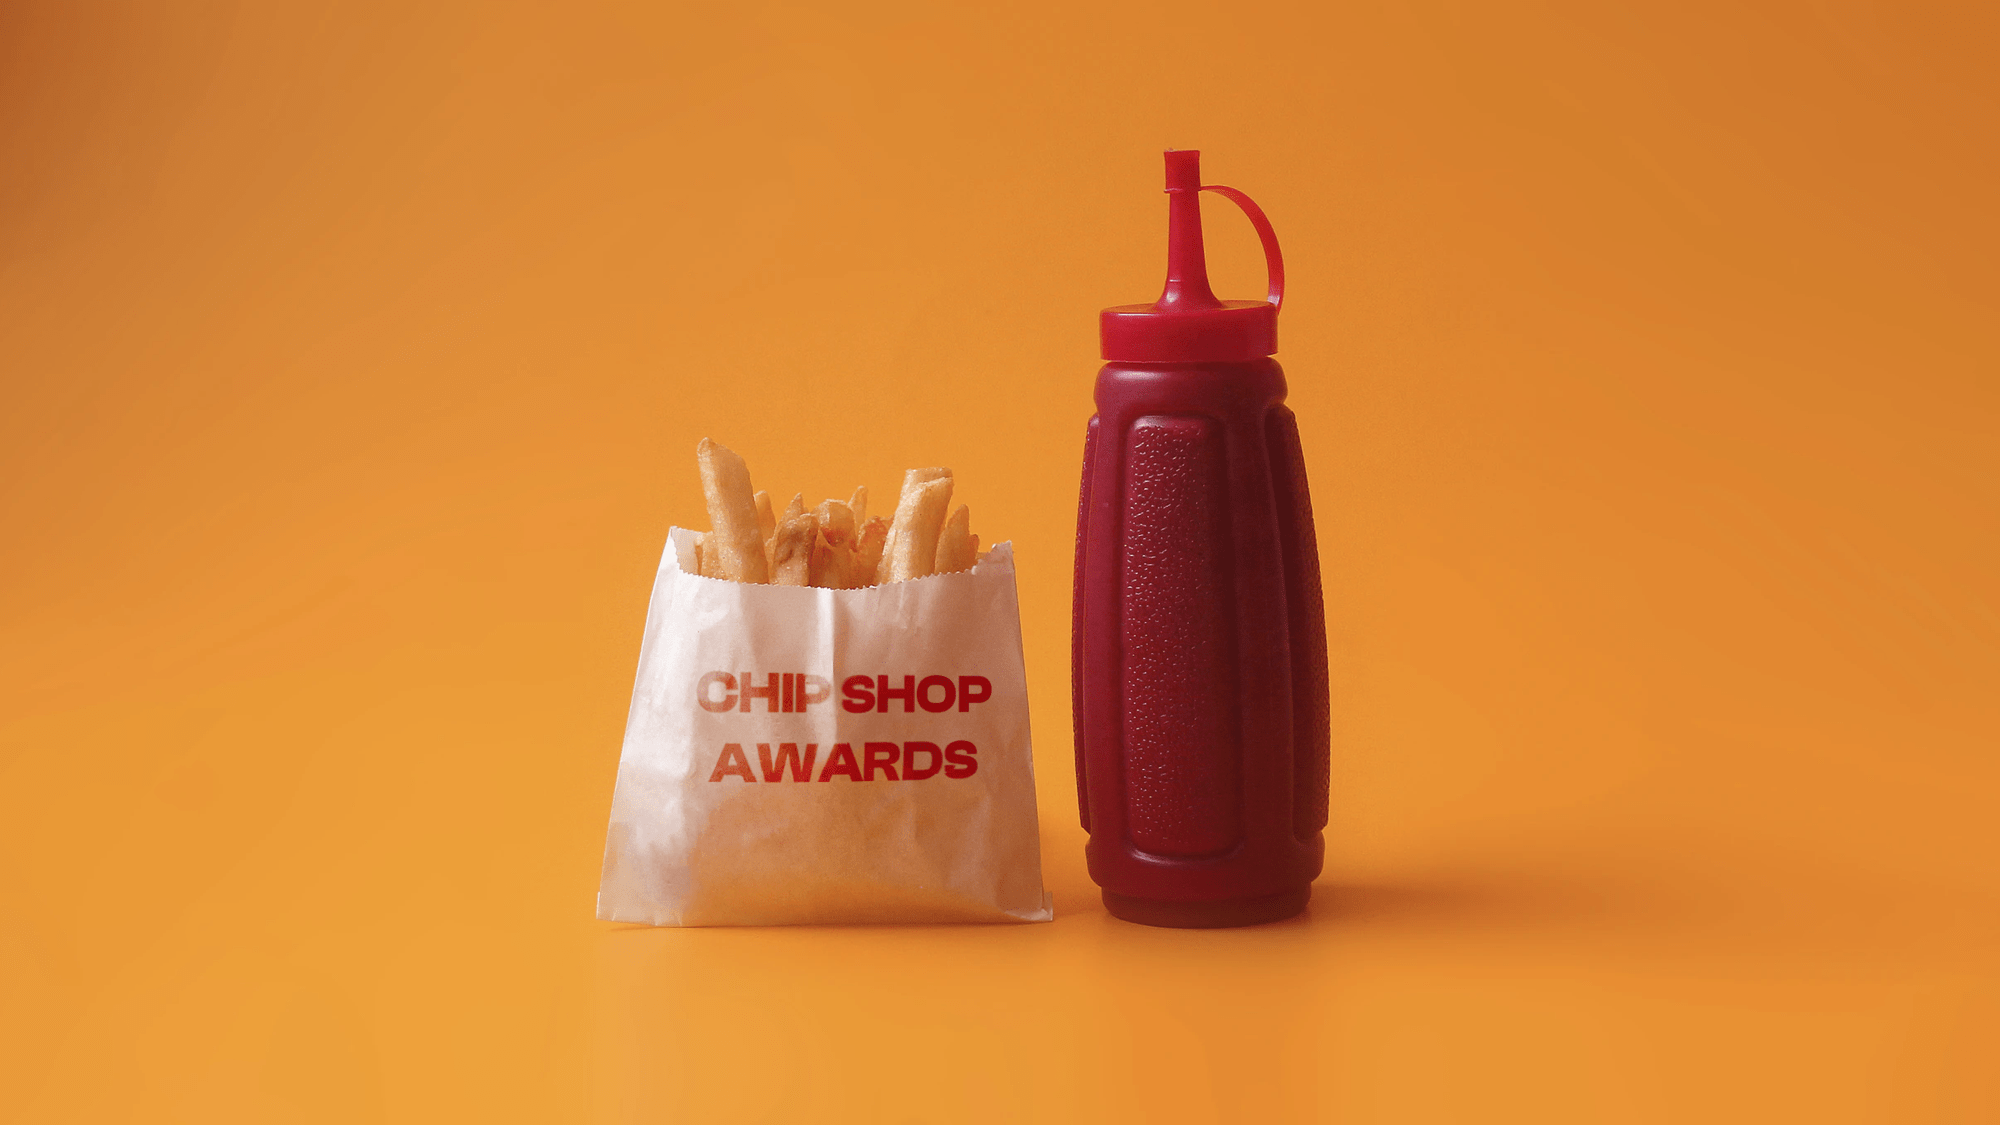 Chip Shop Awards featured on a bag of fries